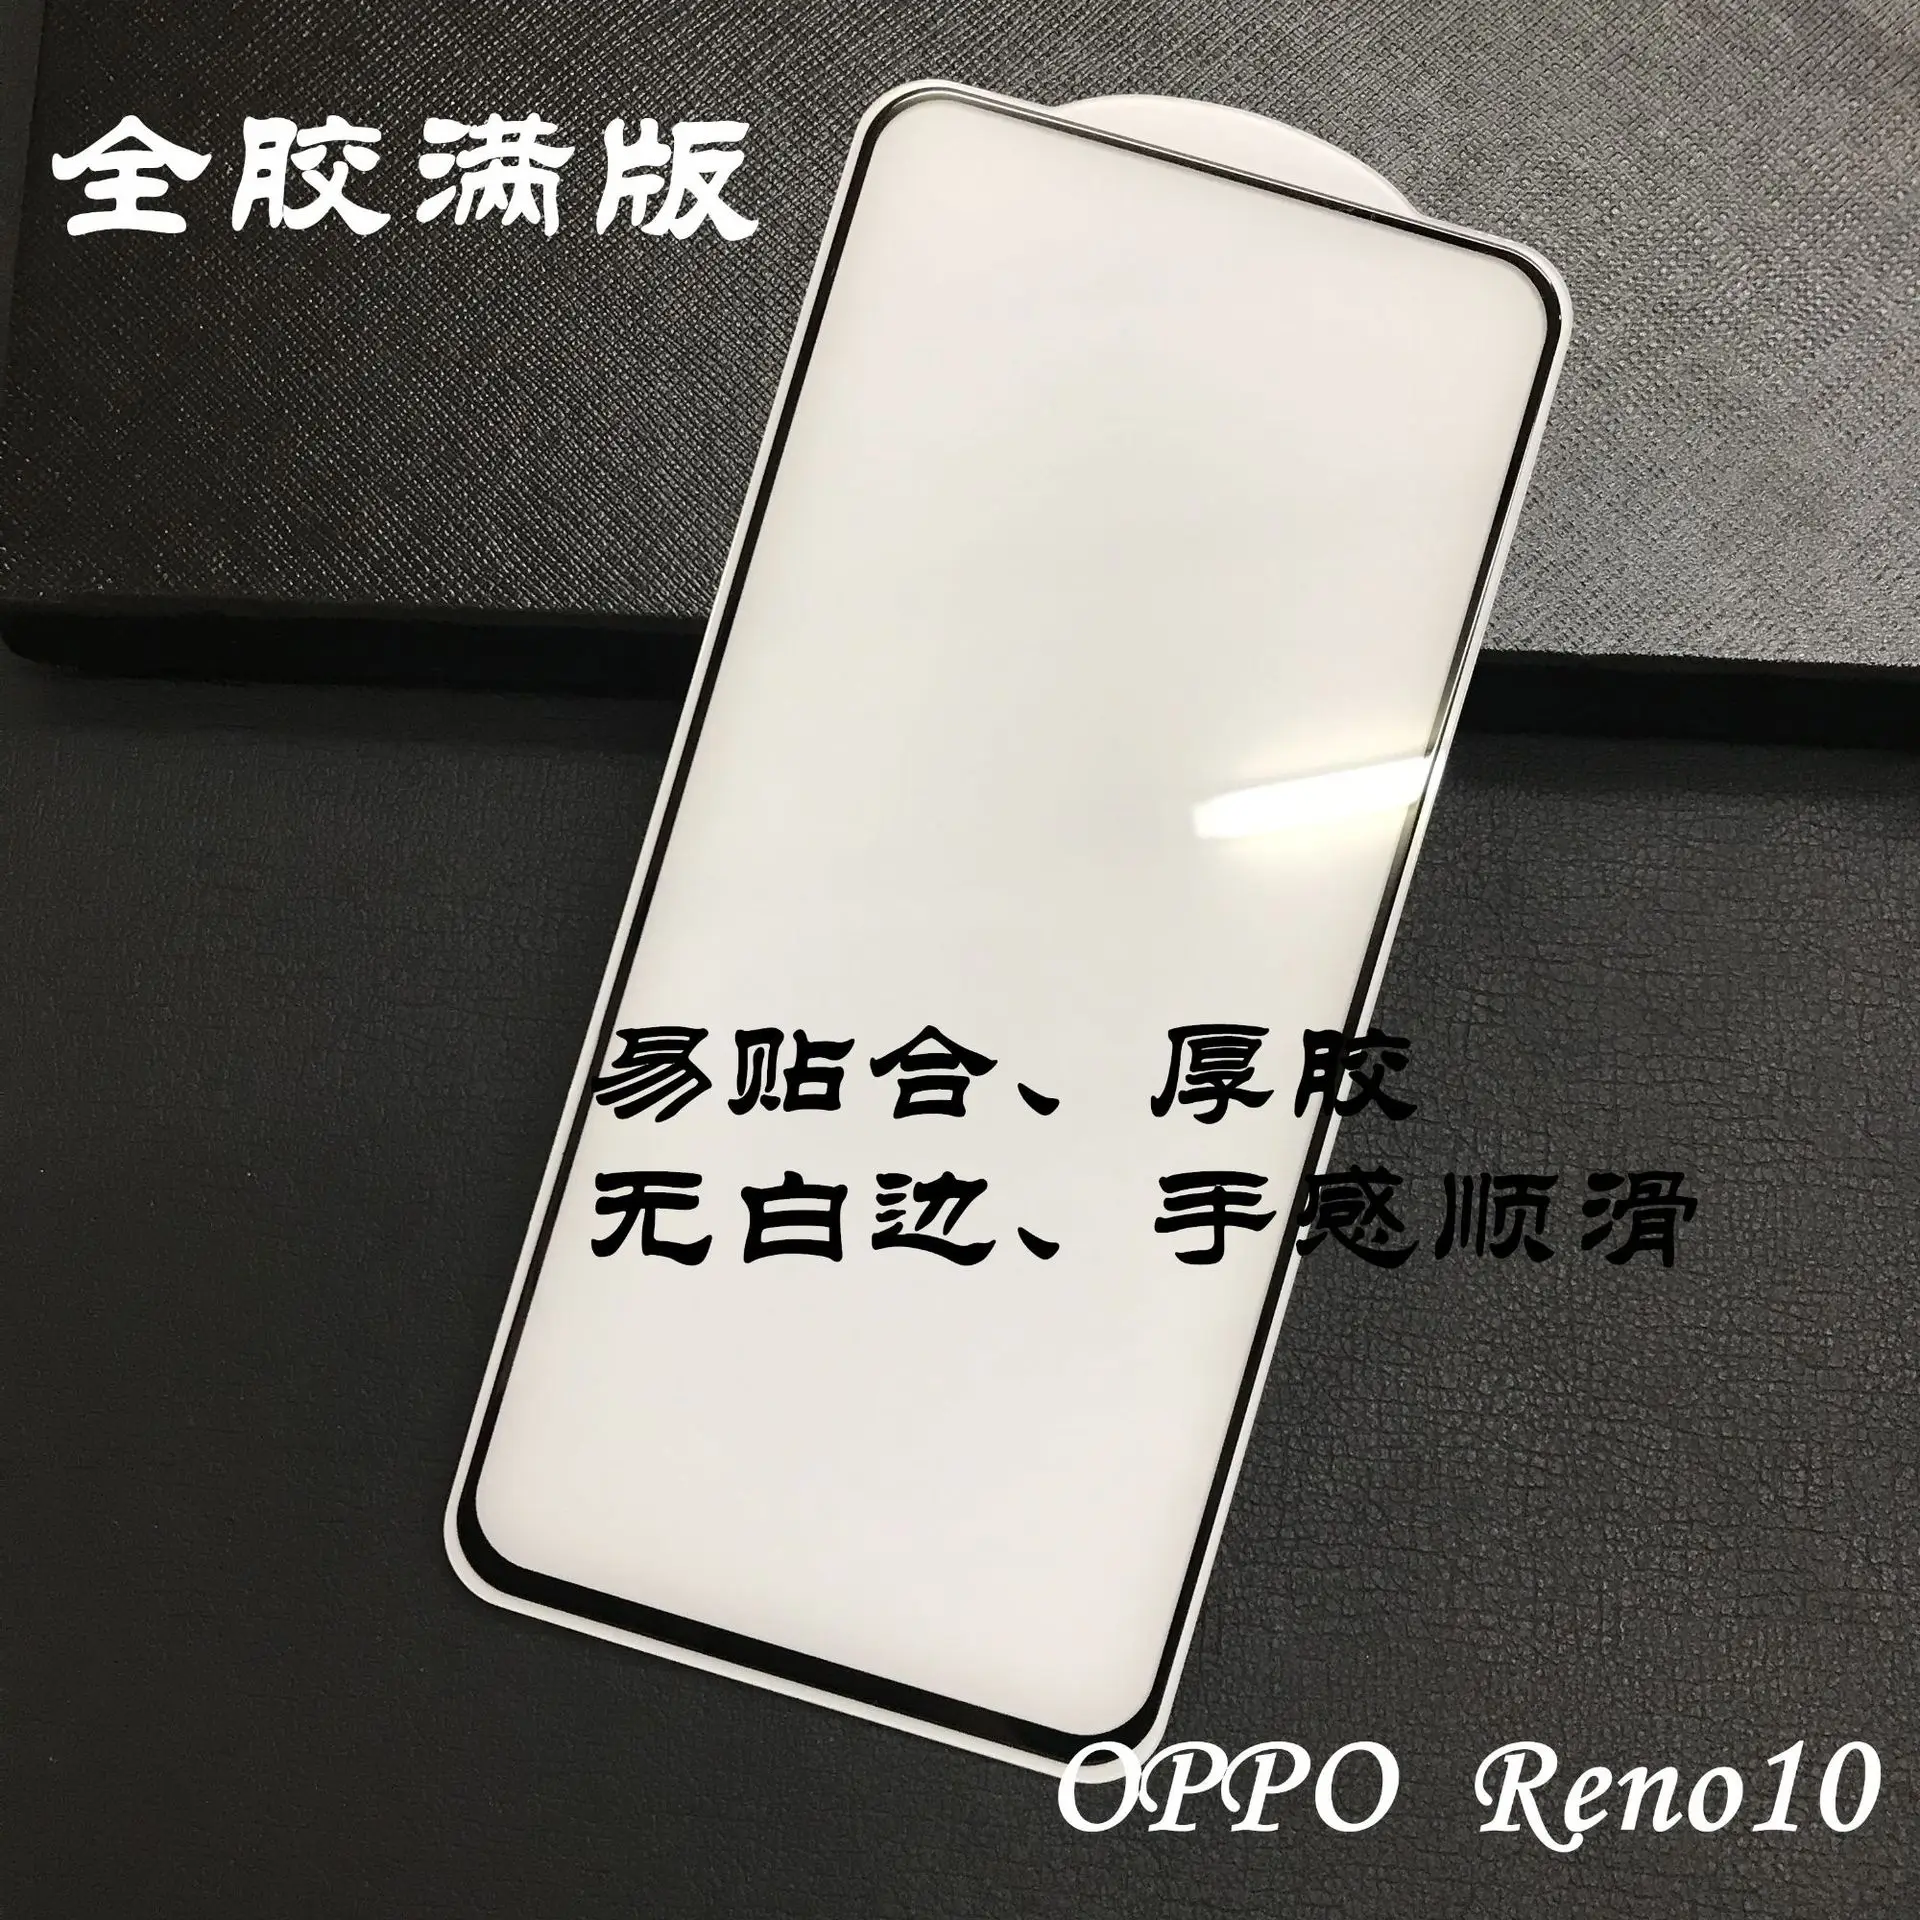 

CheeryMoon Full Glue for OPPO Reno 2 10 ace R19 R17 E1 K3 K5 F11 F7 Pro A9X A9X S1 A9 Screen Protector Tempered Film Cover Glass